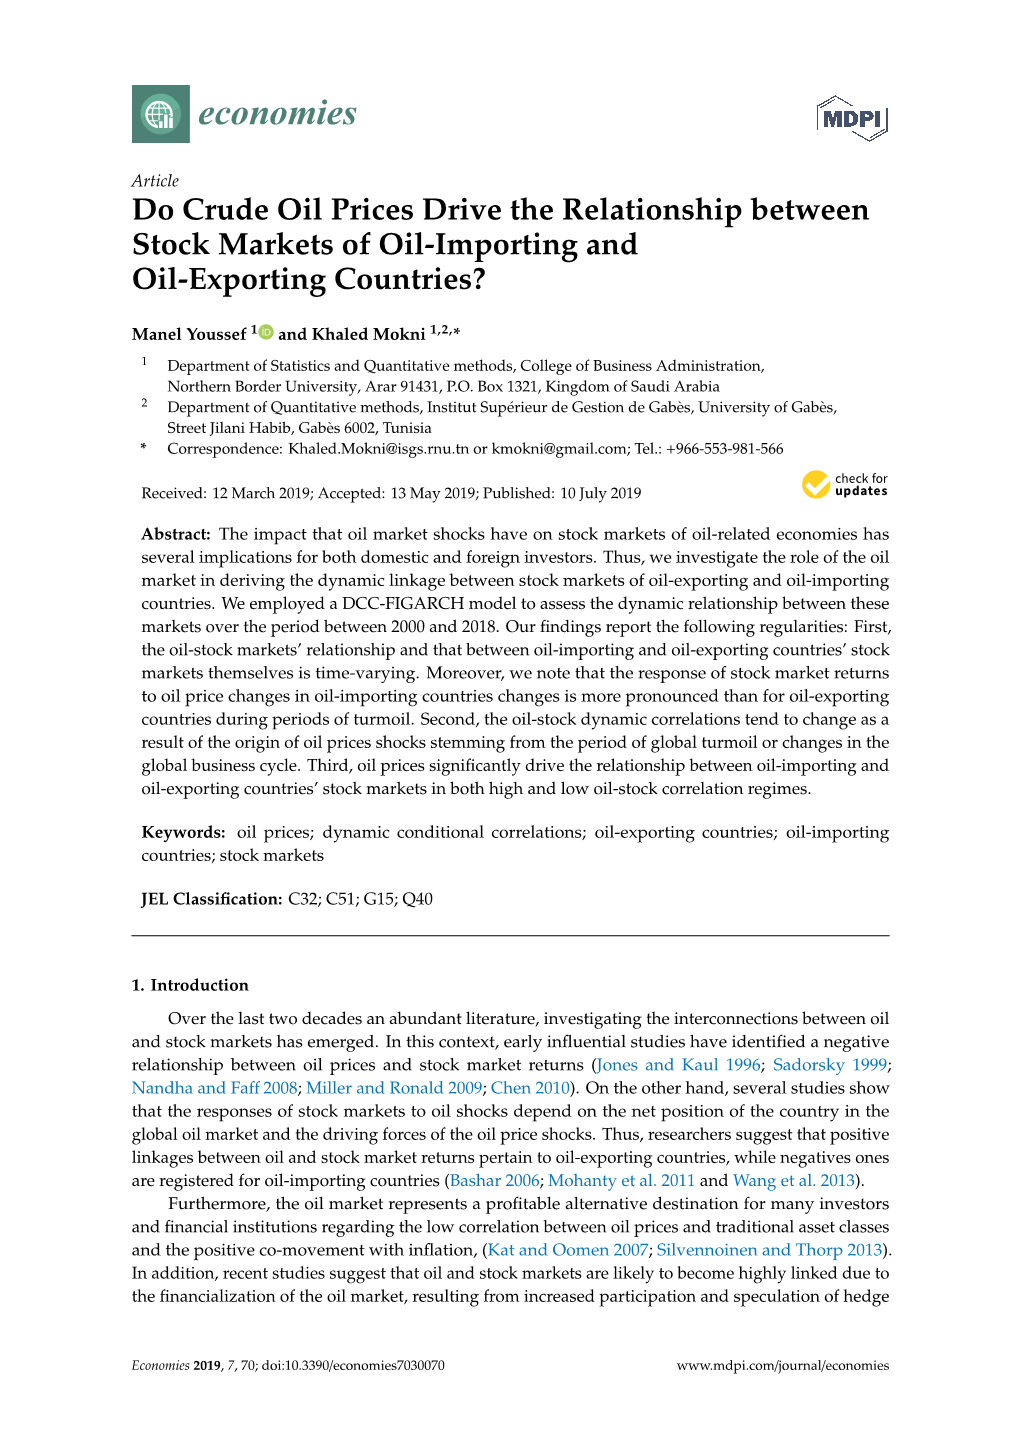 Do Crude Oil Prices Drive the Relationship Between Stock Markets of Oil-Importing and Oil-Exporting Countries?